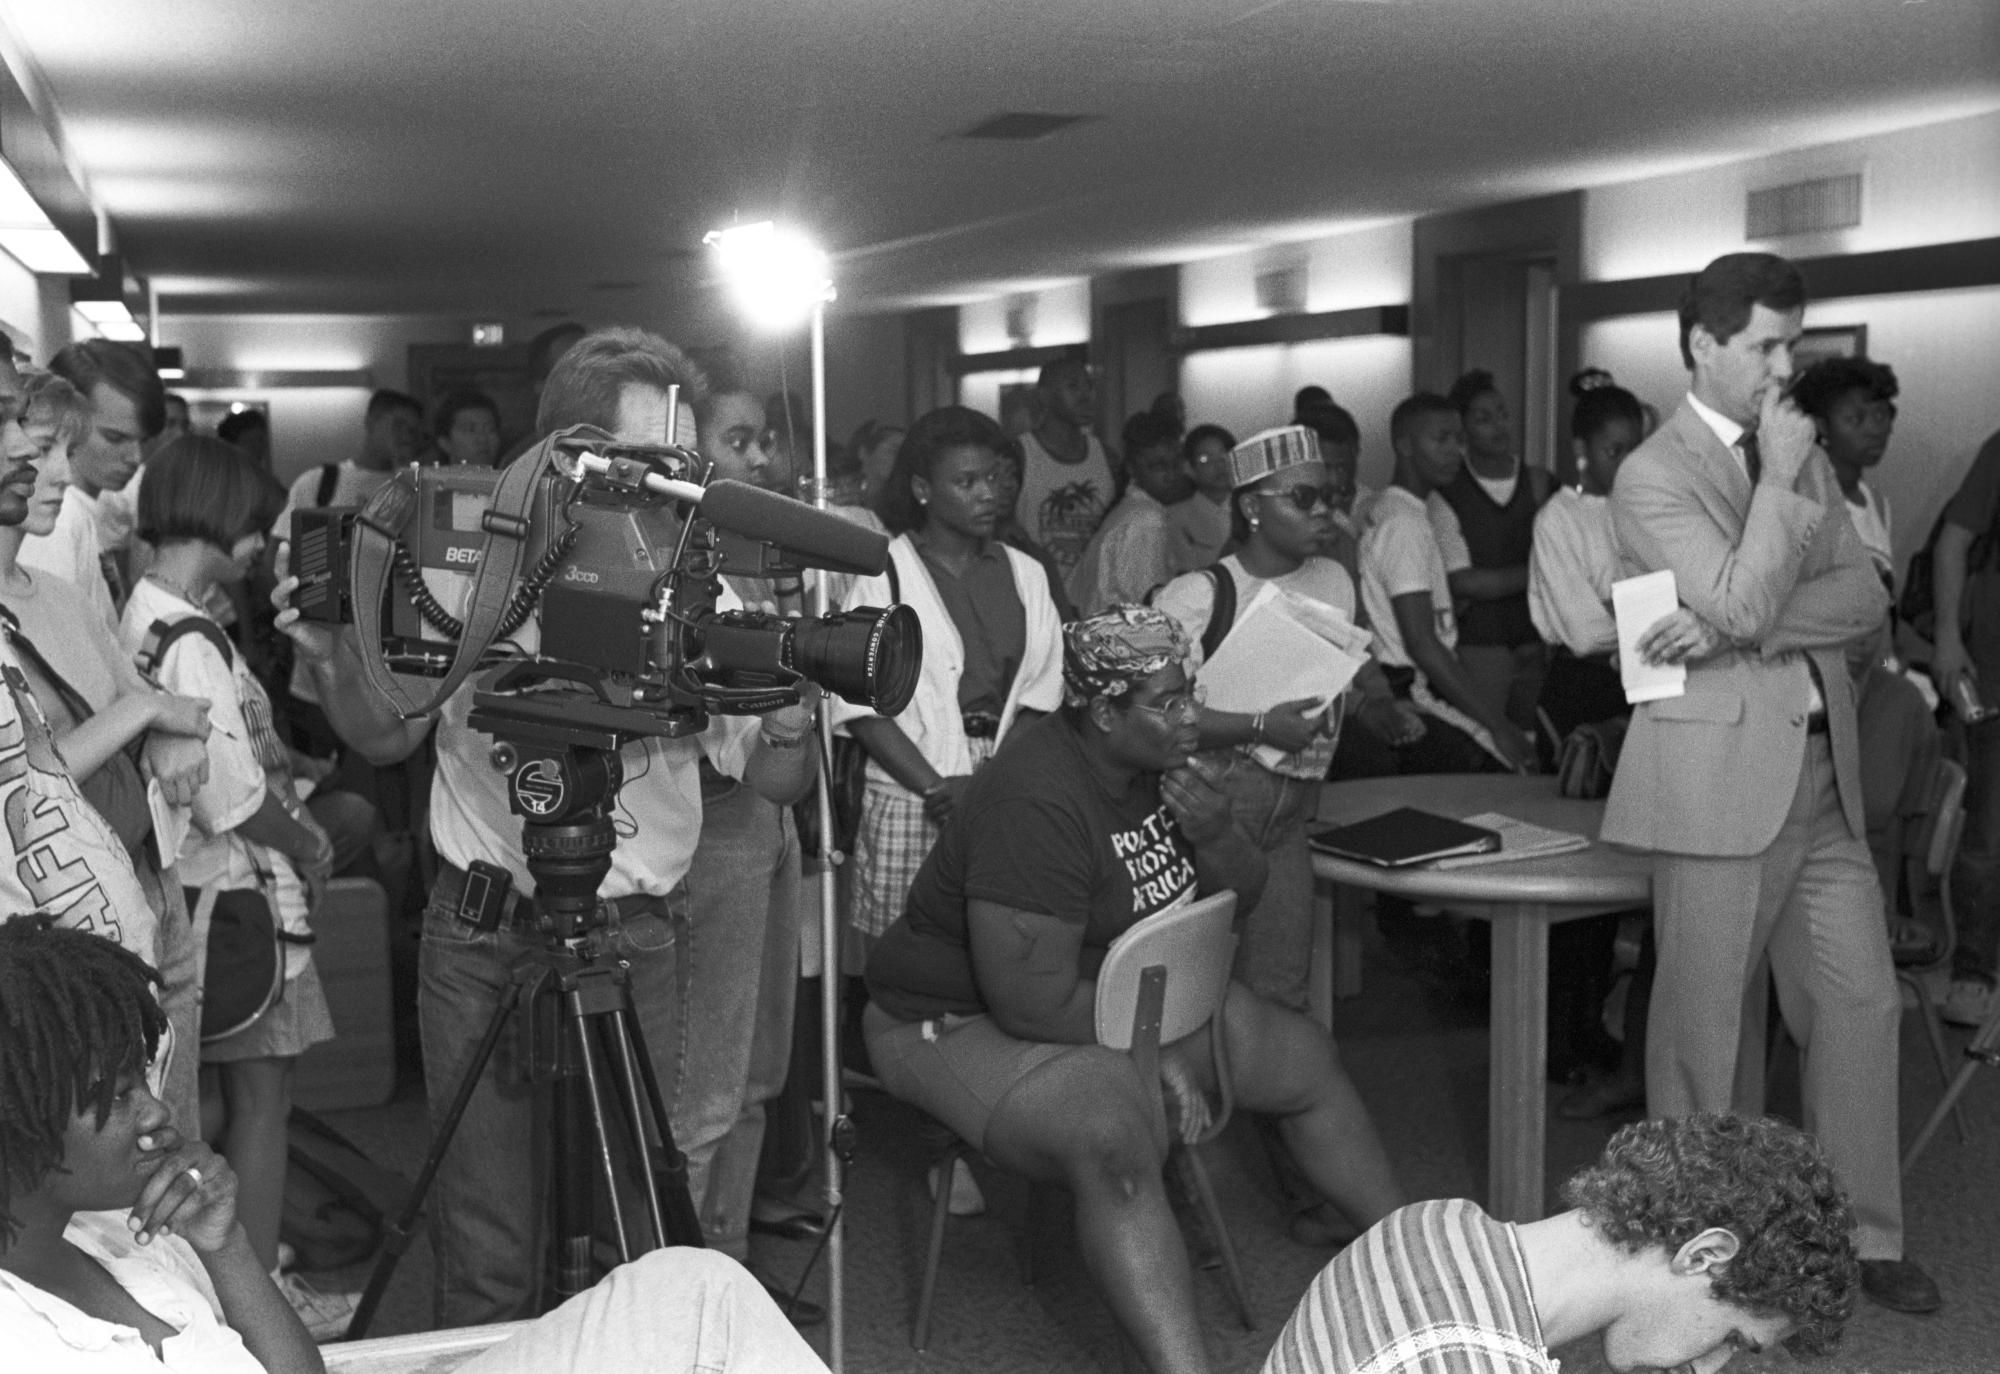 Daily Texan (1990 #2) - BSA Press Conference #2